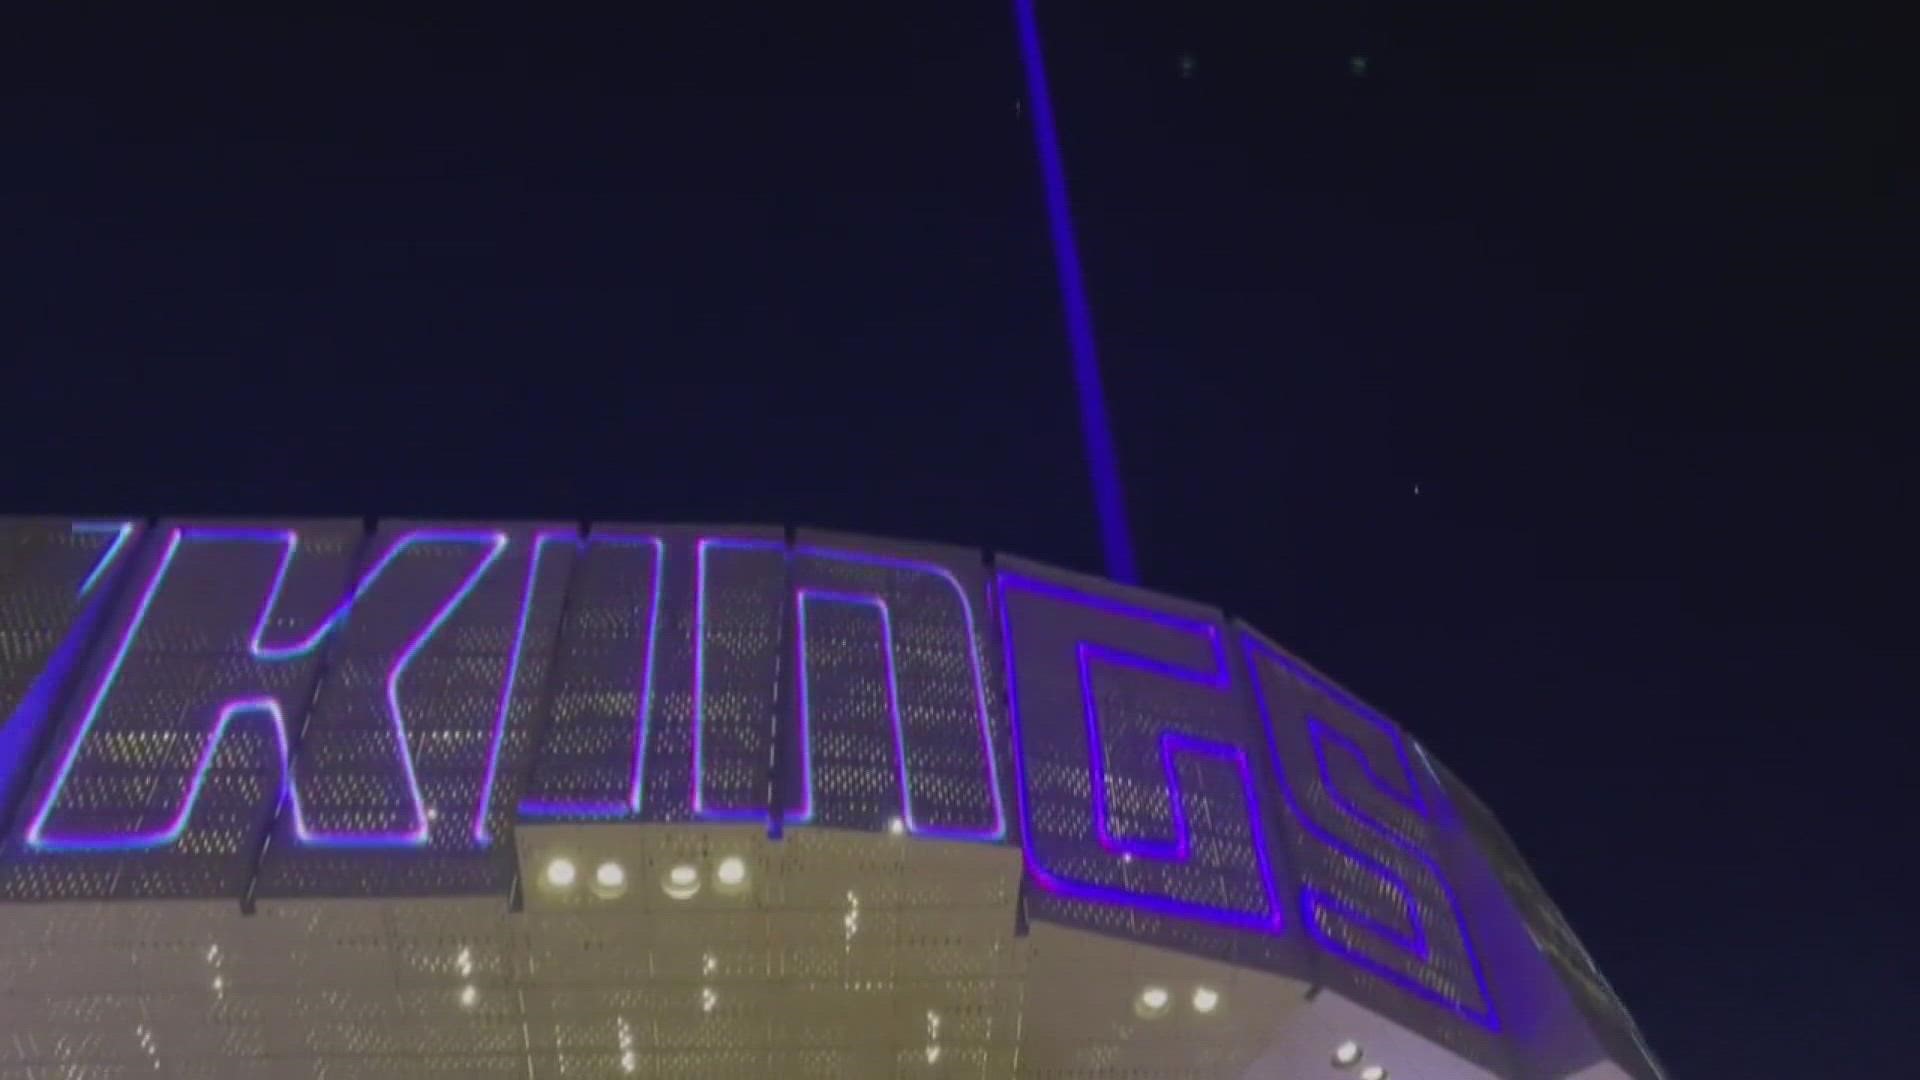 The idea for the Sacramento Kings purple beam came together for the first time on Sept. 16, also known as '916 Day'.